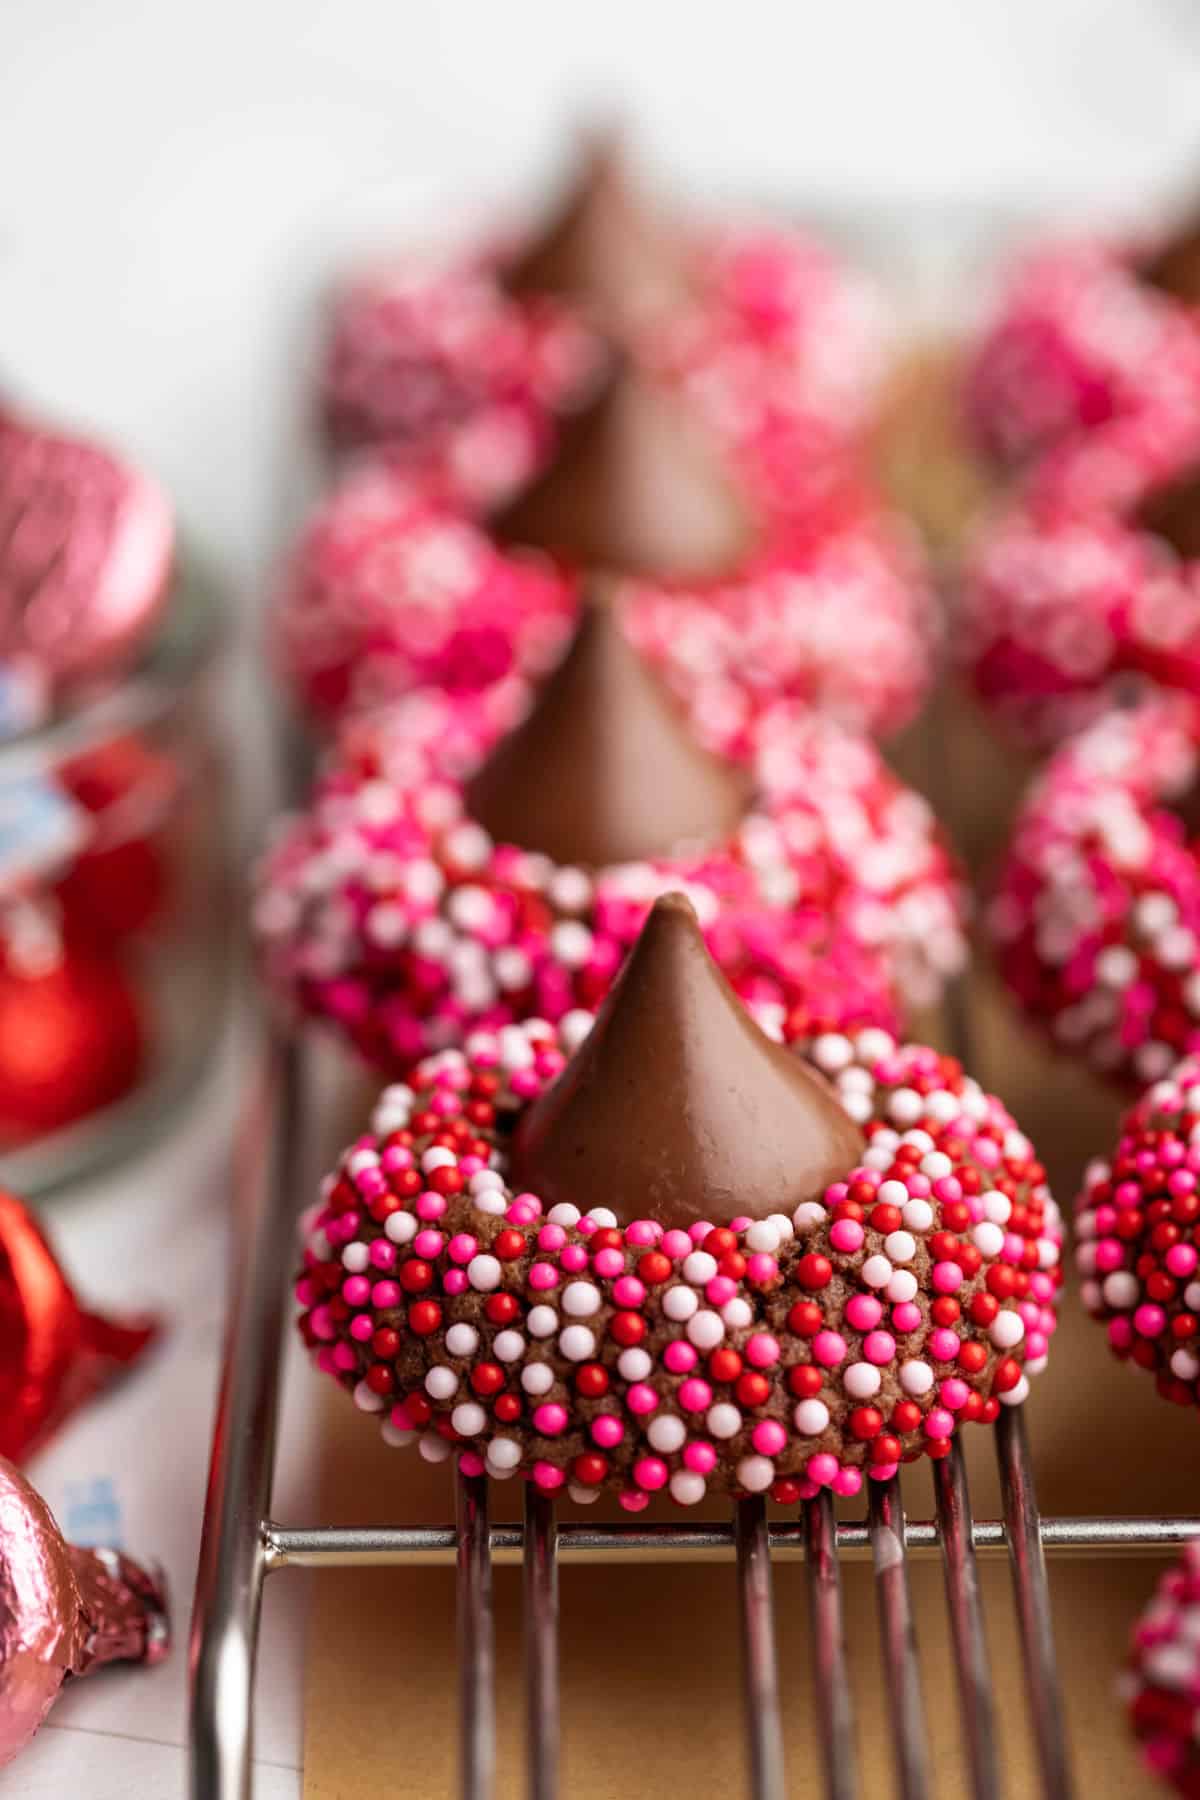 A row of Valentine's Day kiss cookies next to pink and red Hershey kisses.